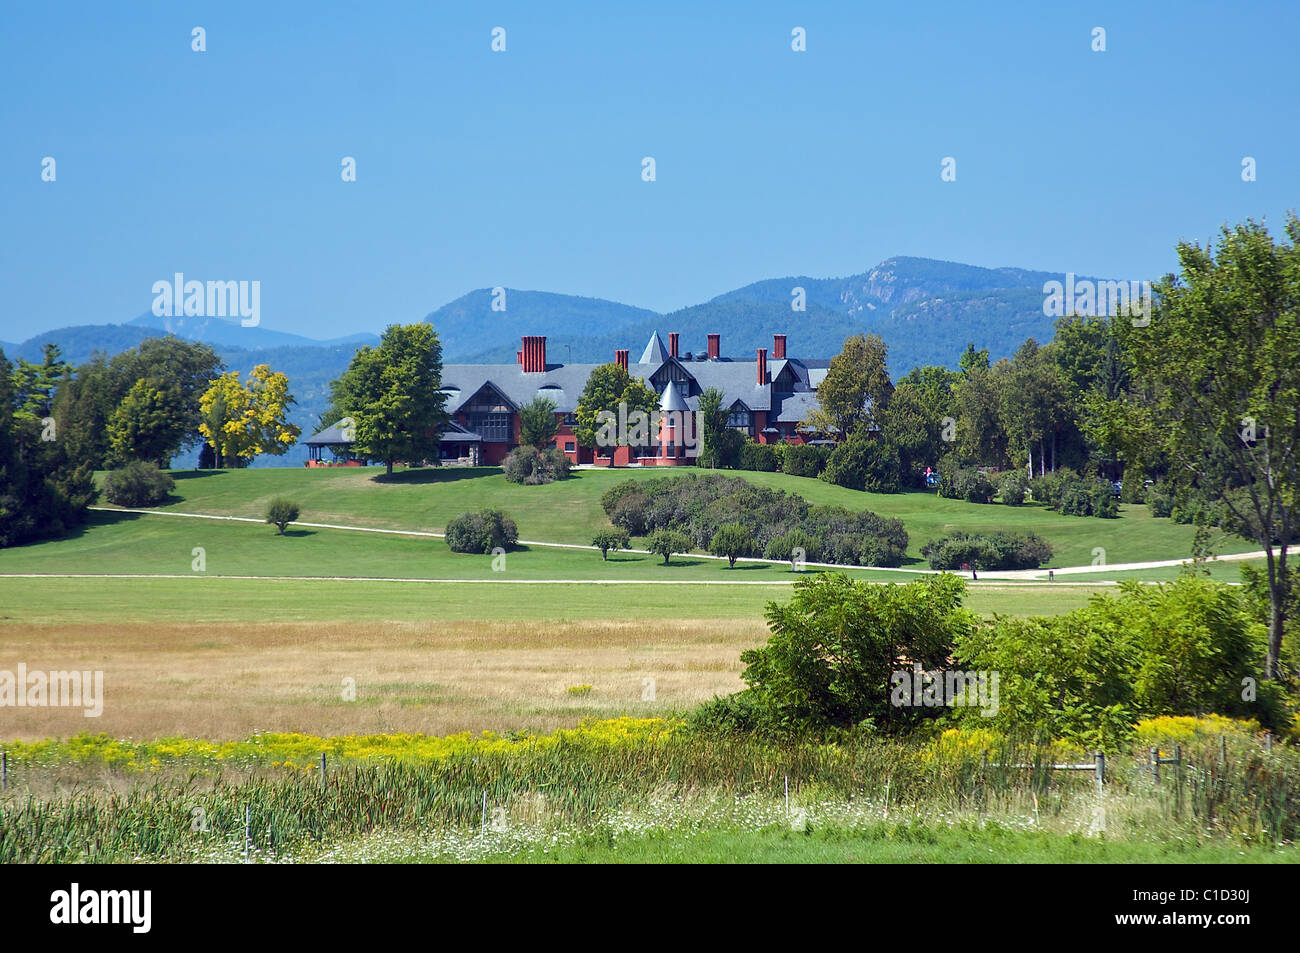 The Inn at Shelburne Farms, on Lake Champlain in Northern Vermont Stock Photo